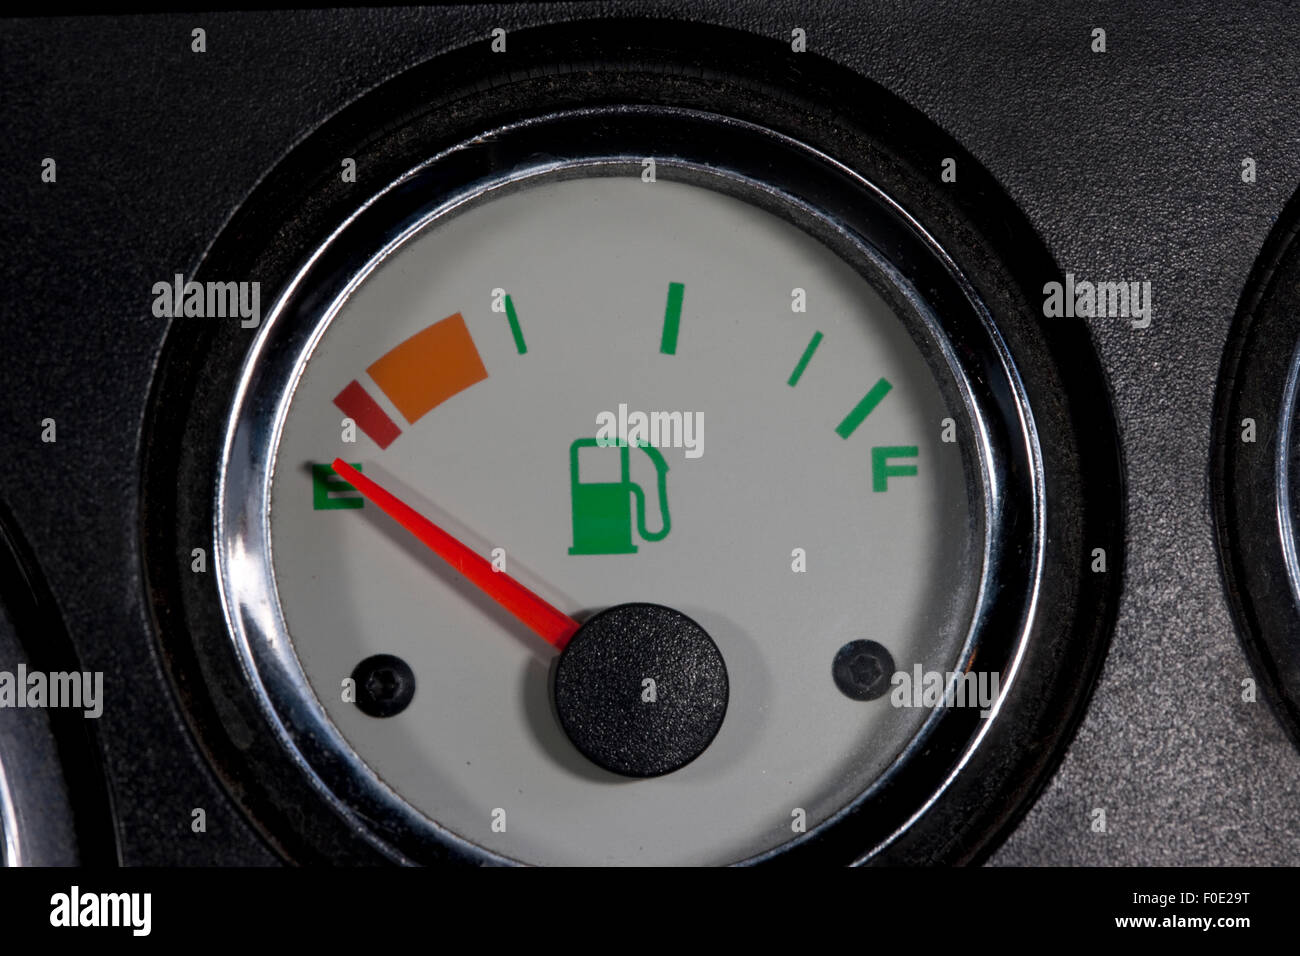 White fuel gauge with red needle showing empty tank Stock Photo